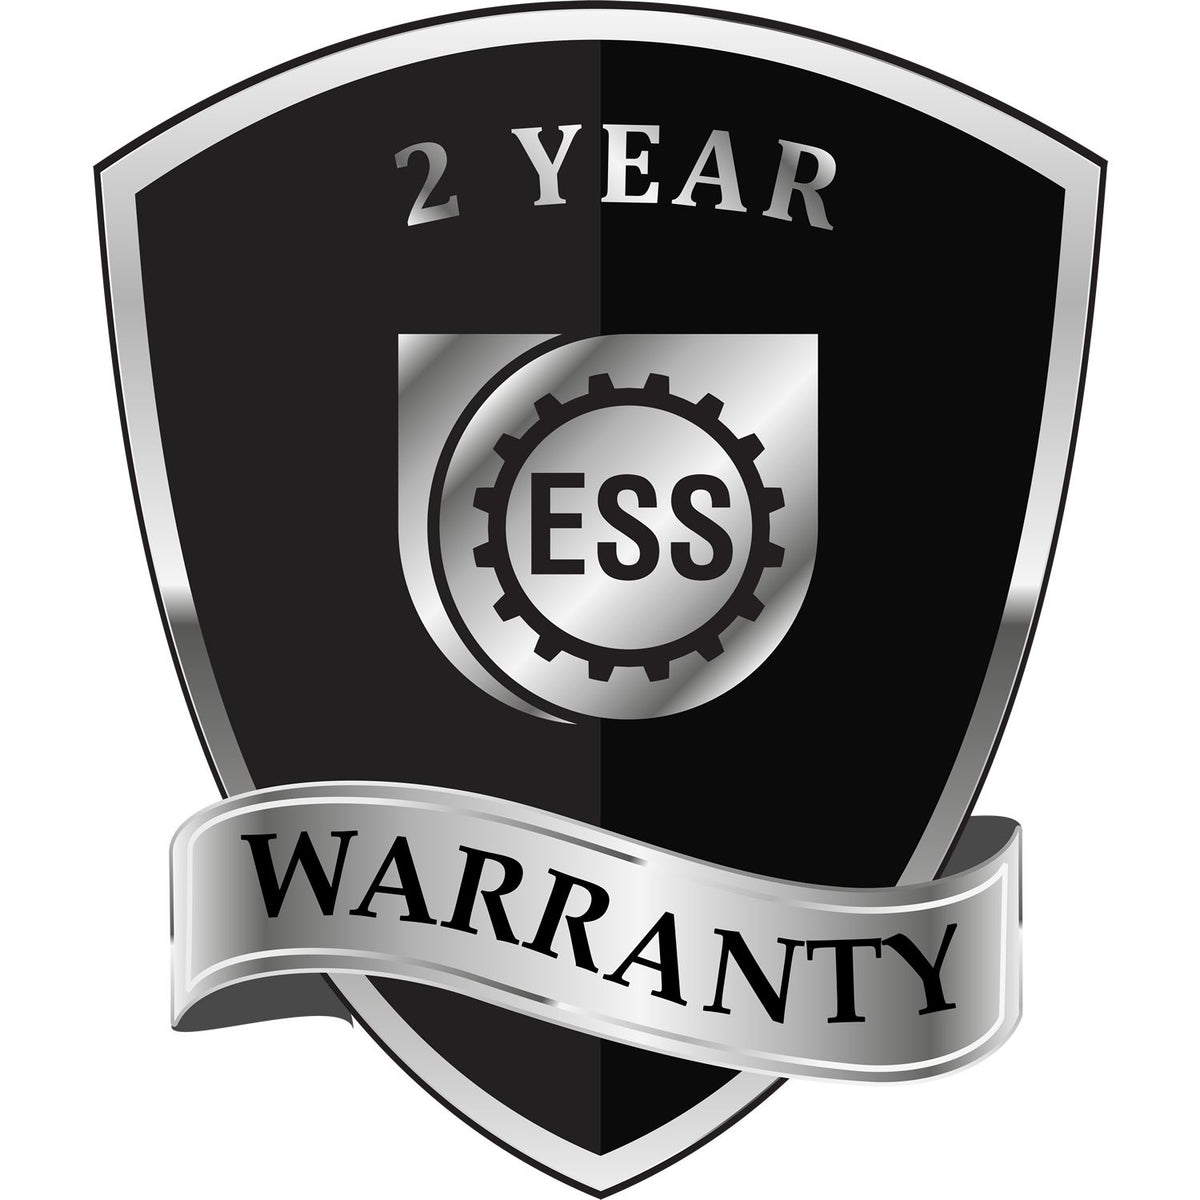 A badge or emblem showing a warranty icon for the Extended Long Reach Arizona Architect Seal Embosser